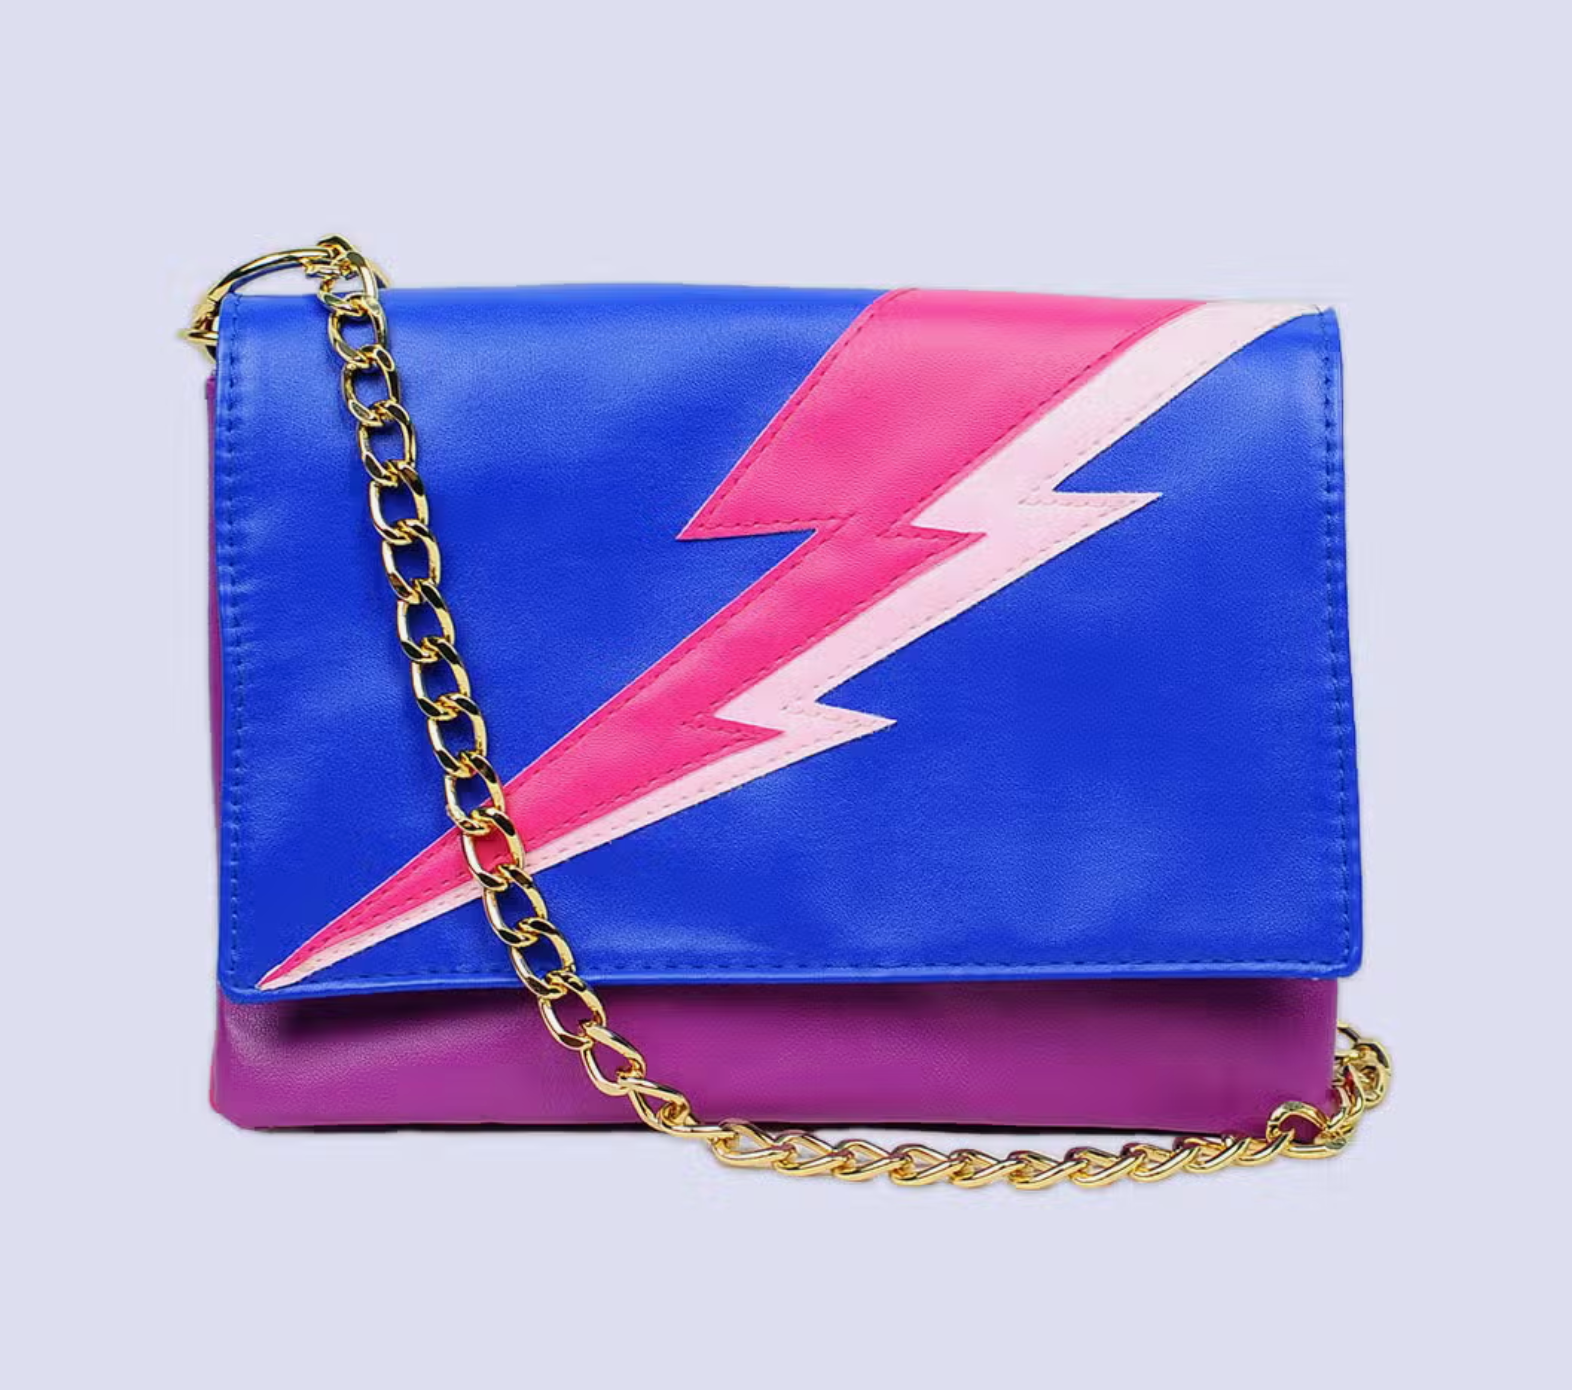 Lightning Bolt Convertible Clutch in Electric Blue + Pink